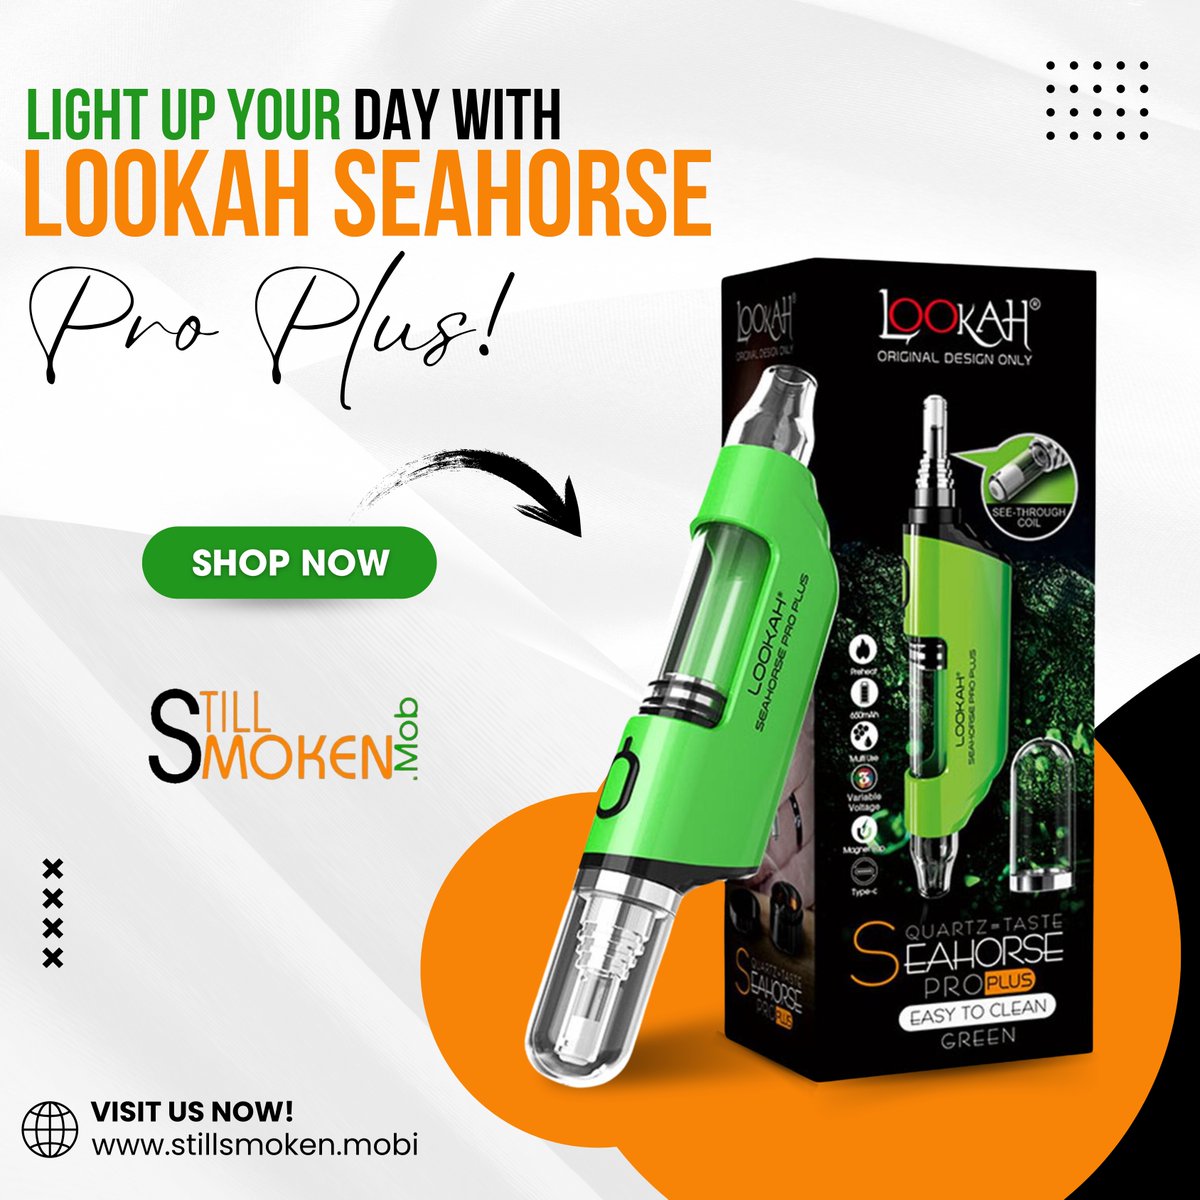 🌟 Turn your vaping sessions into a party with Lookah Seahorse Pro Plus! 🎉 Its sleek design and powerful performance will have you dancing in clouds of delicious vapor!

#lookahseahorseproplus #vapeparty #clouddancing #sleekvaping #powerfulperformance #compactvape #vapecompanion